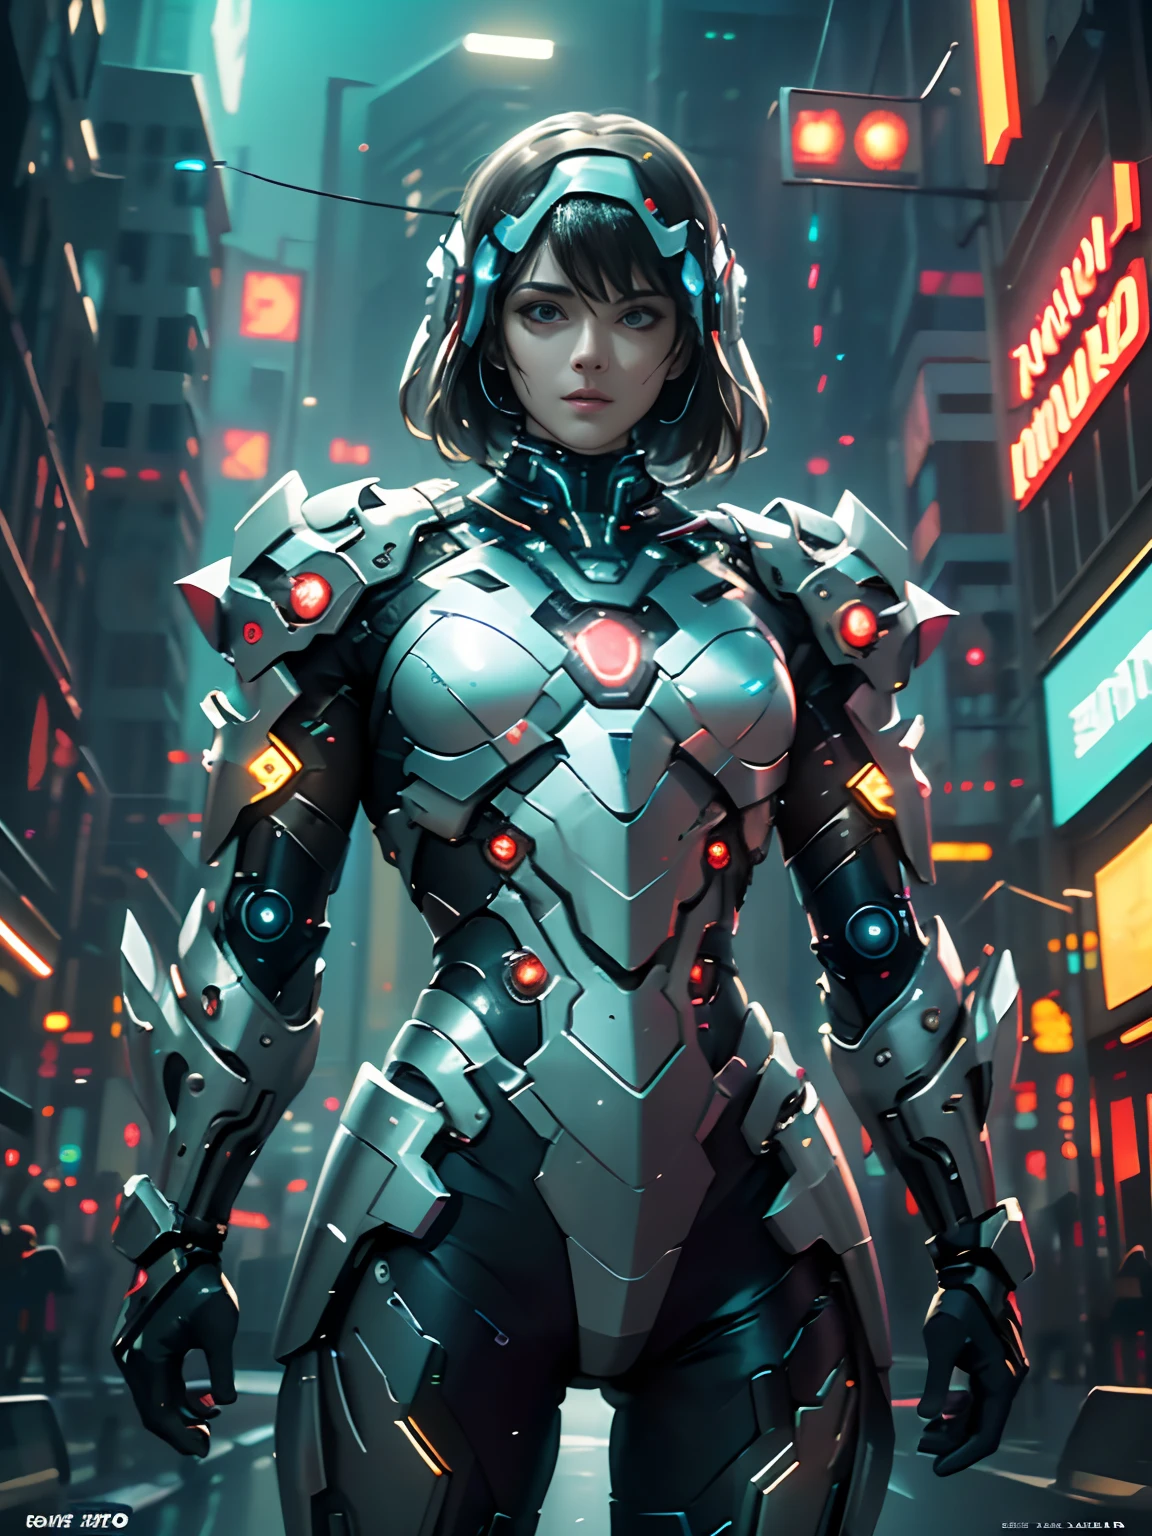 (best quality:1.3), (best performance:1.2), (best illustration:1.2), (Comic style:1.2), (artistic cinematic lighting:1.2) (1man) wearing futuristic technological Cyberpunk electronic robes, his body is covered by metallic parts, in a cinematic horror movie background in a futuristic Cyberpunk city.